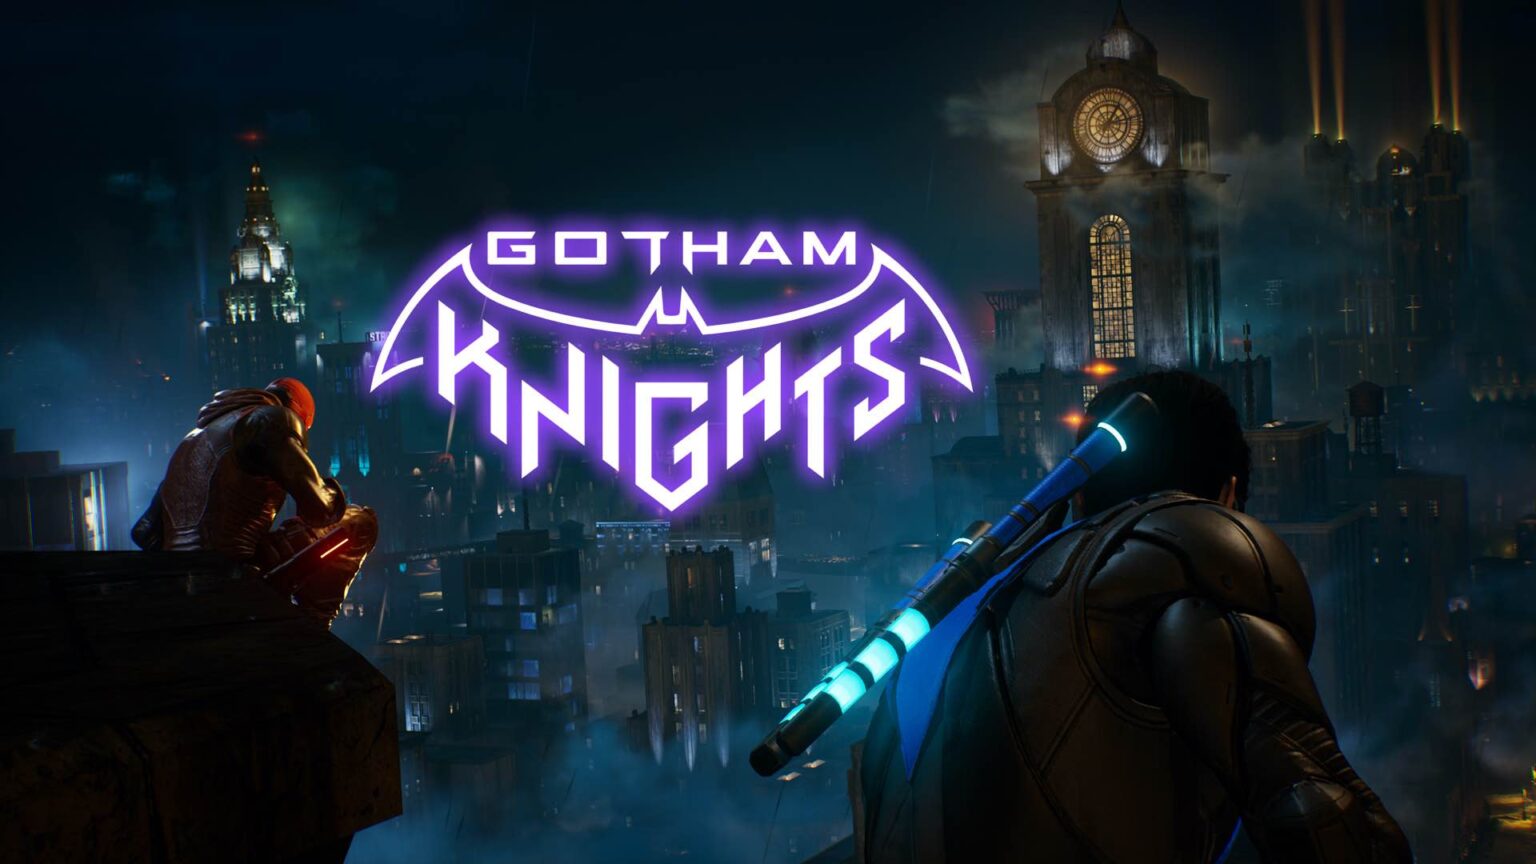 One of the most highly anticipated videogames is about Batman, but there's no Caped Crusader here. Swing into 'Gotham Knights' before it drops.